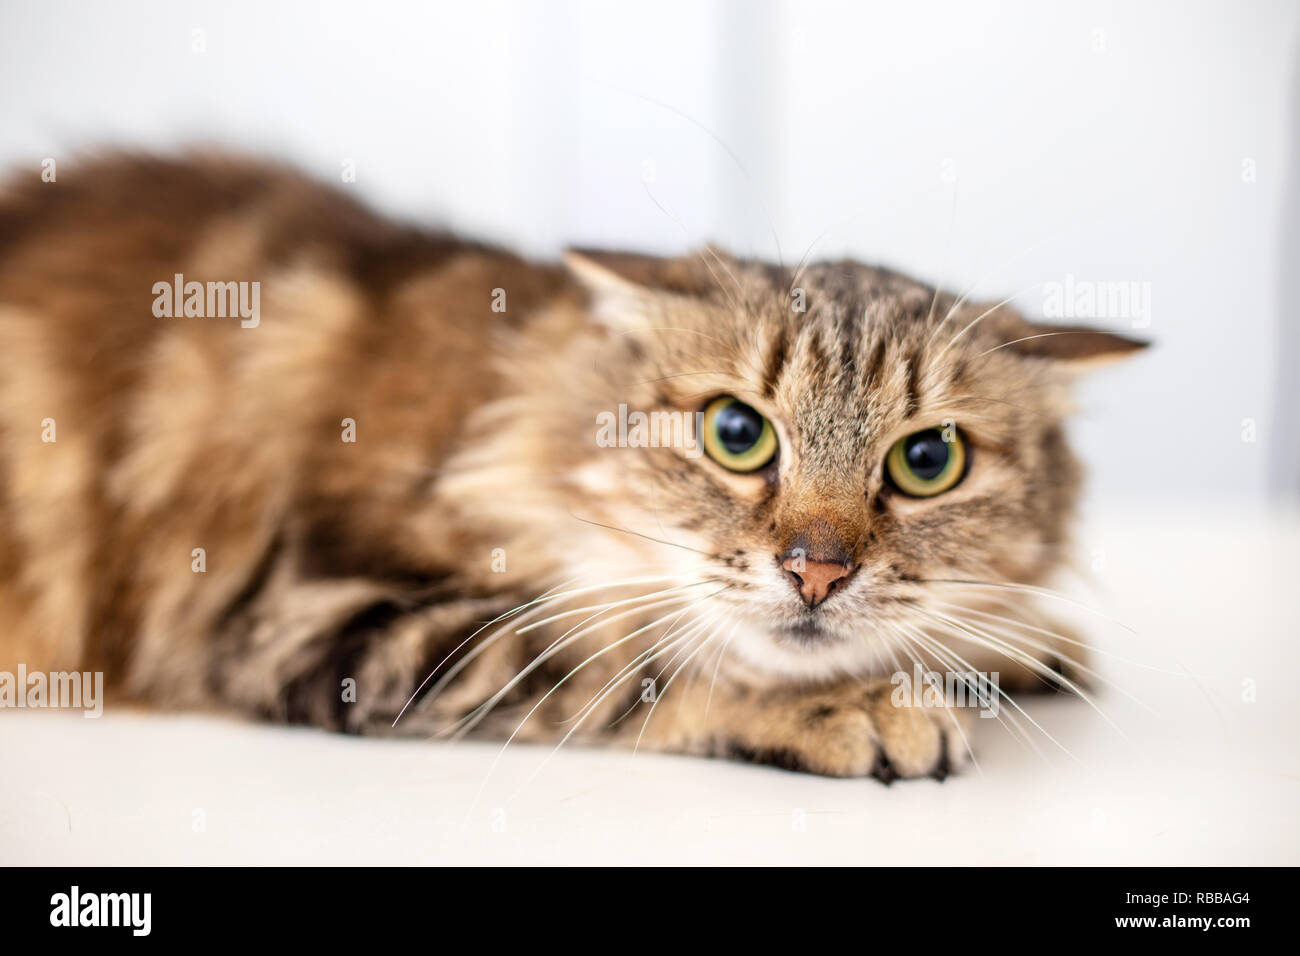 Funny striped cat on white background Stock Photo